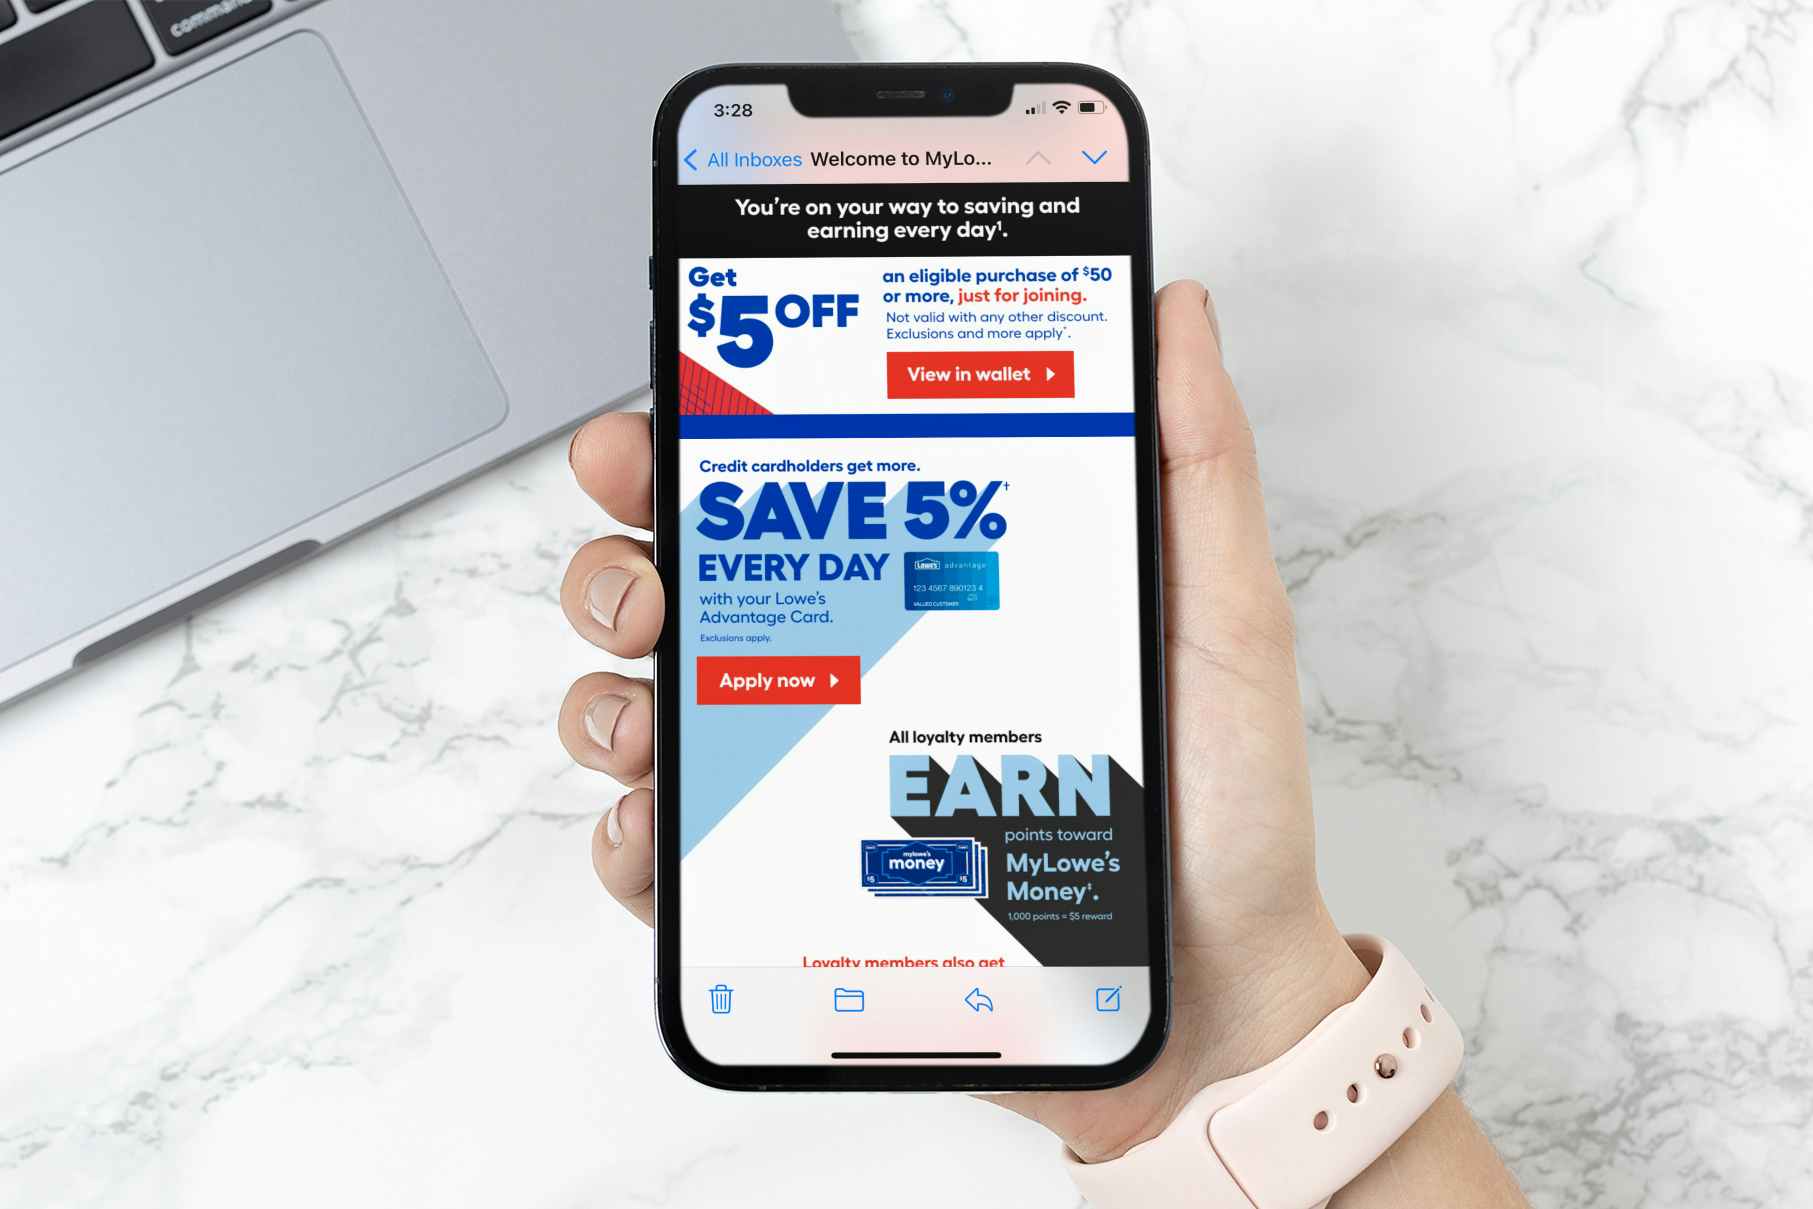 my-lowes-rewards-program-coupon-offer-email-phone-placeit